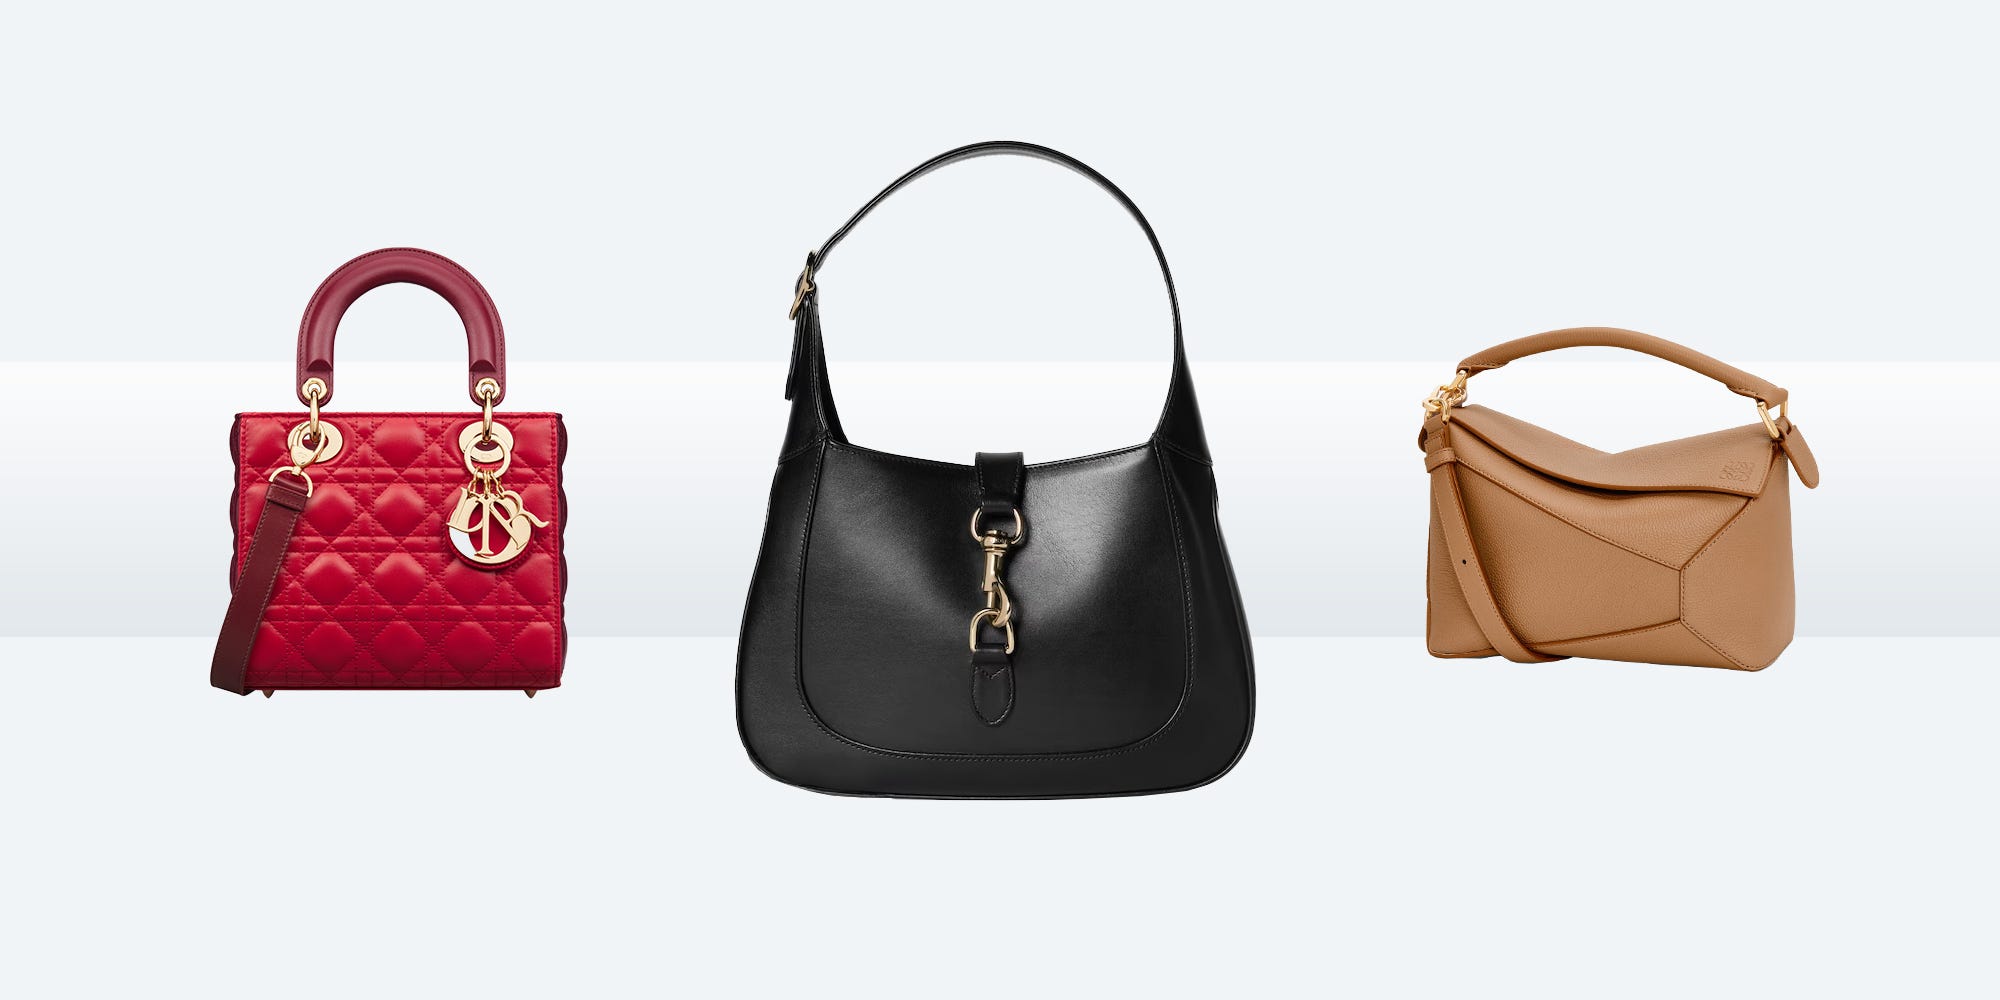 17 of the Most Classic Designer Bags of All Time